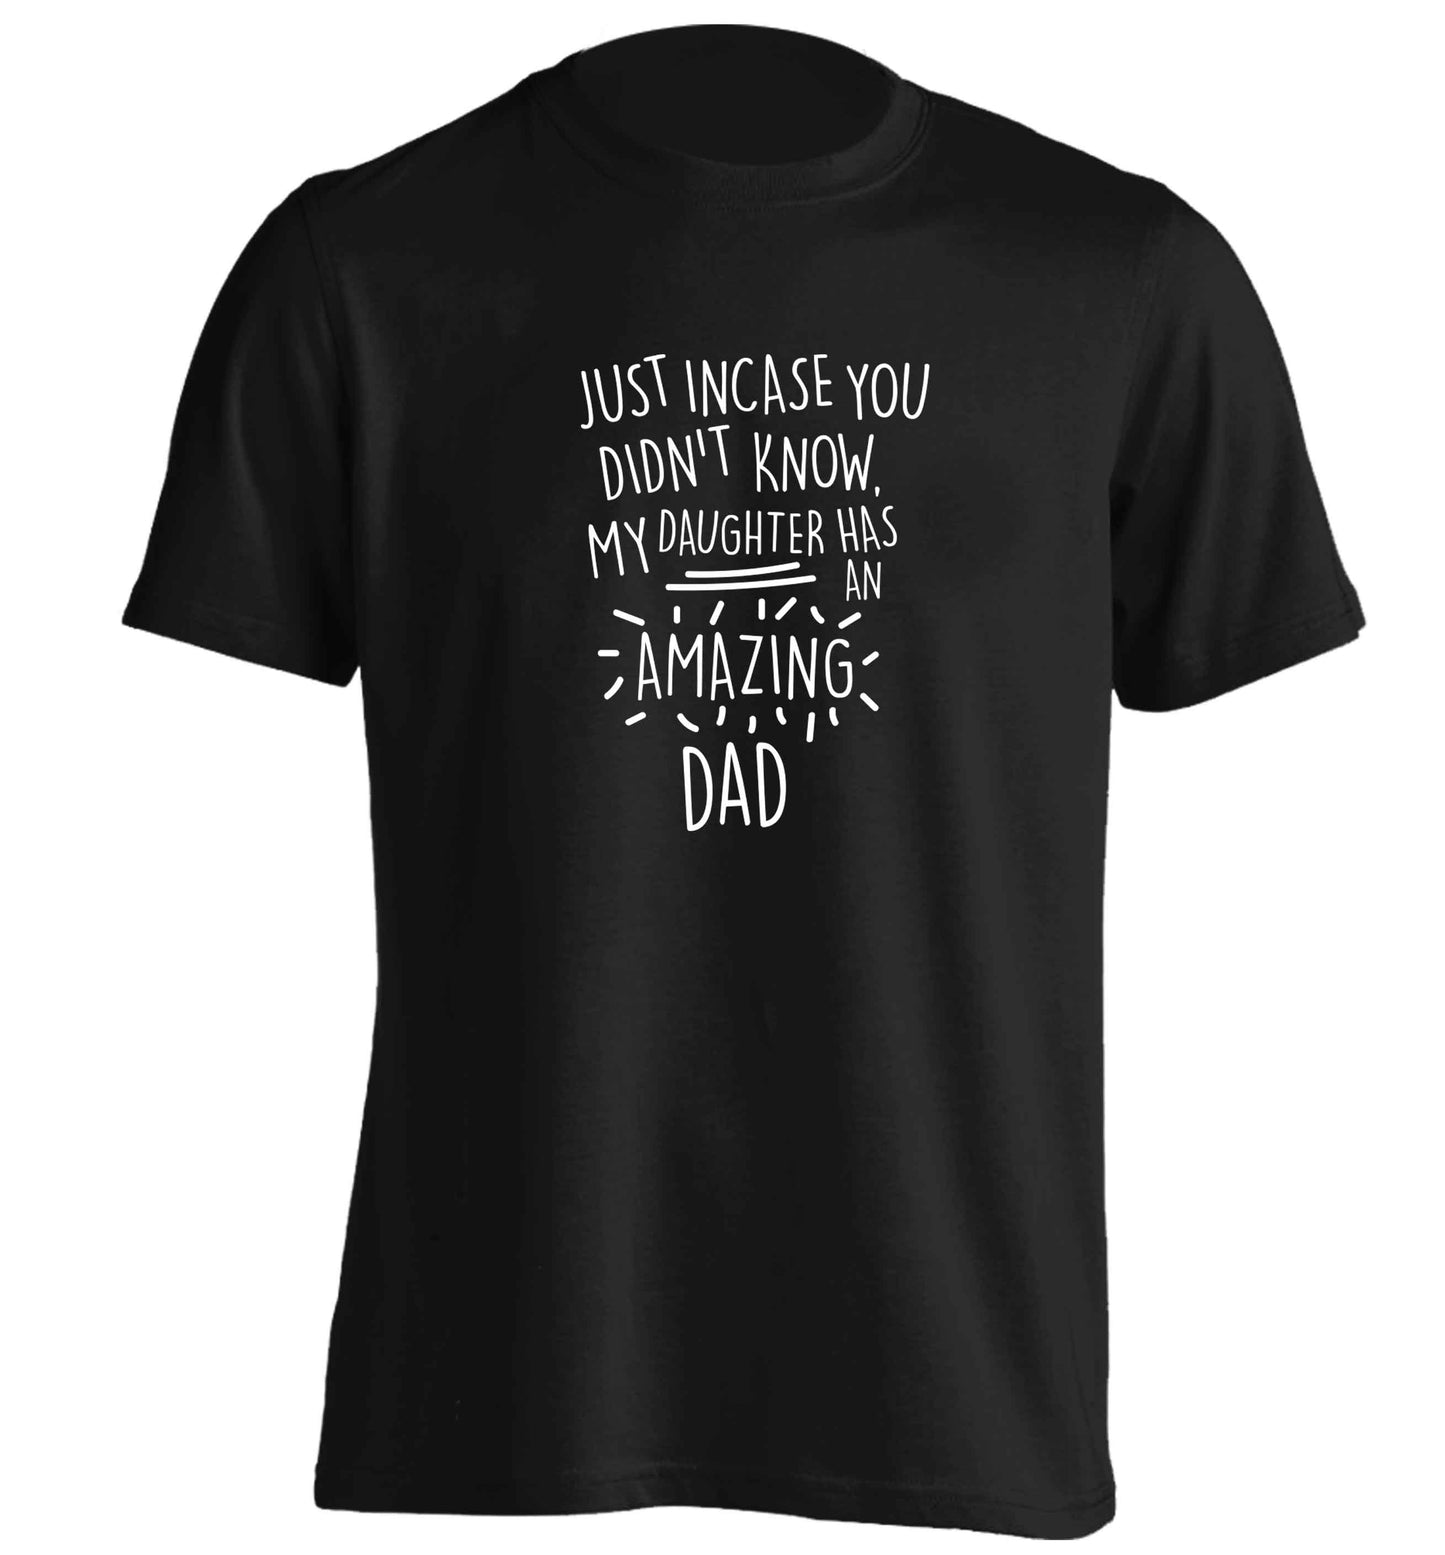 Just incase you didn't know my daughter has an amazing dad adults unisex black Tshirt 2XL